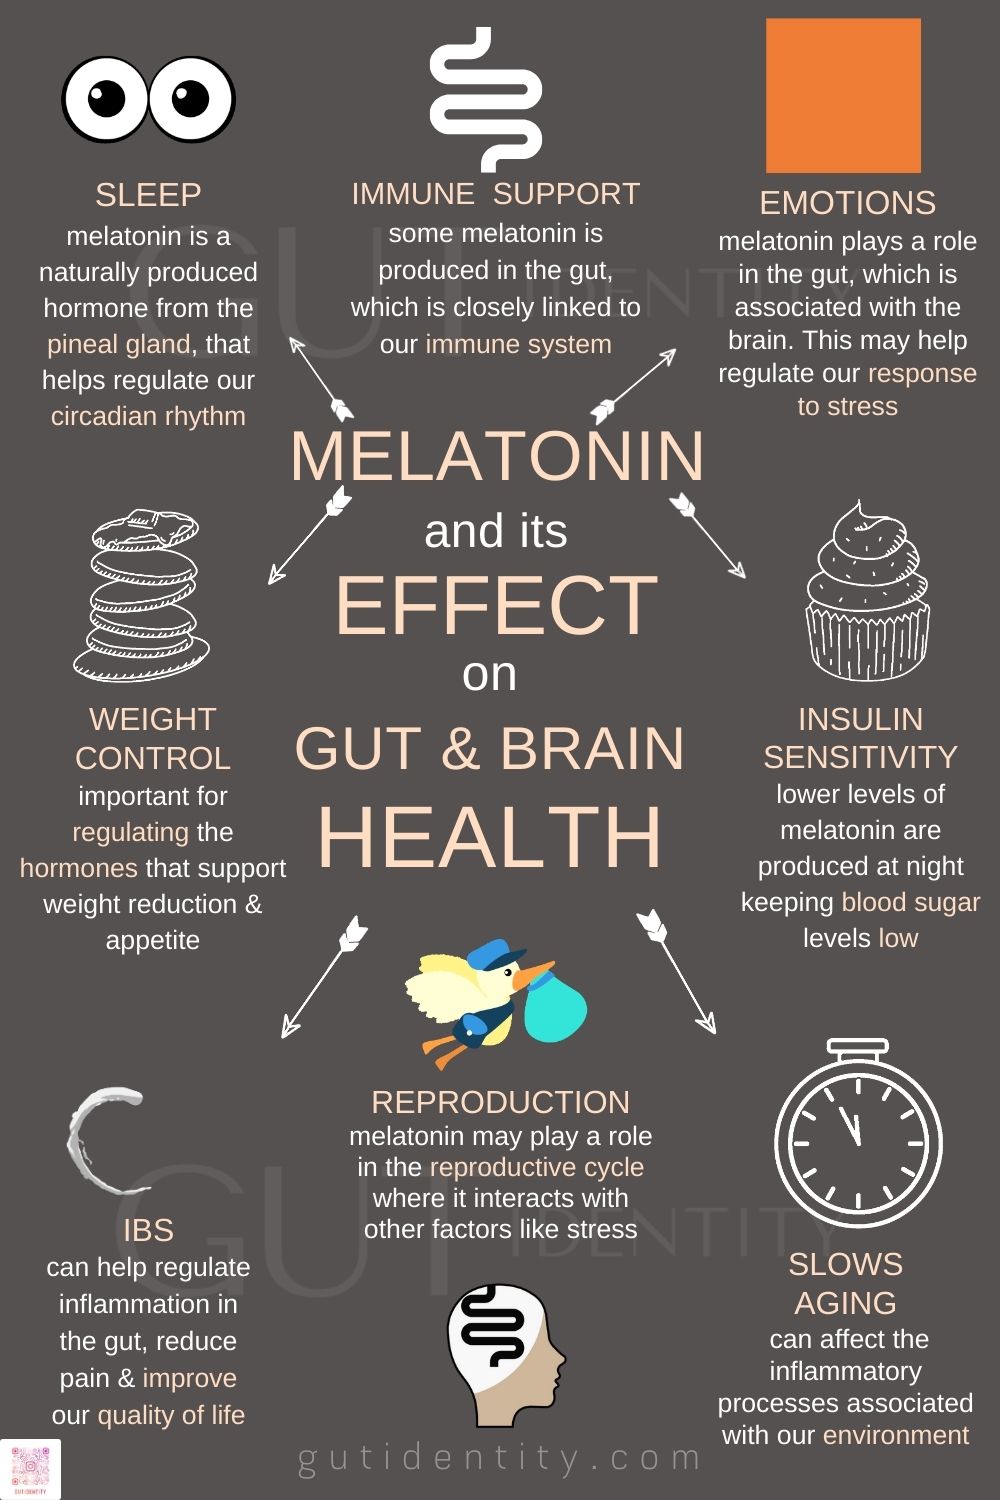 Melatonin and its effect on gut and brain health